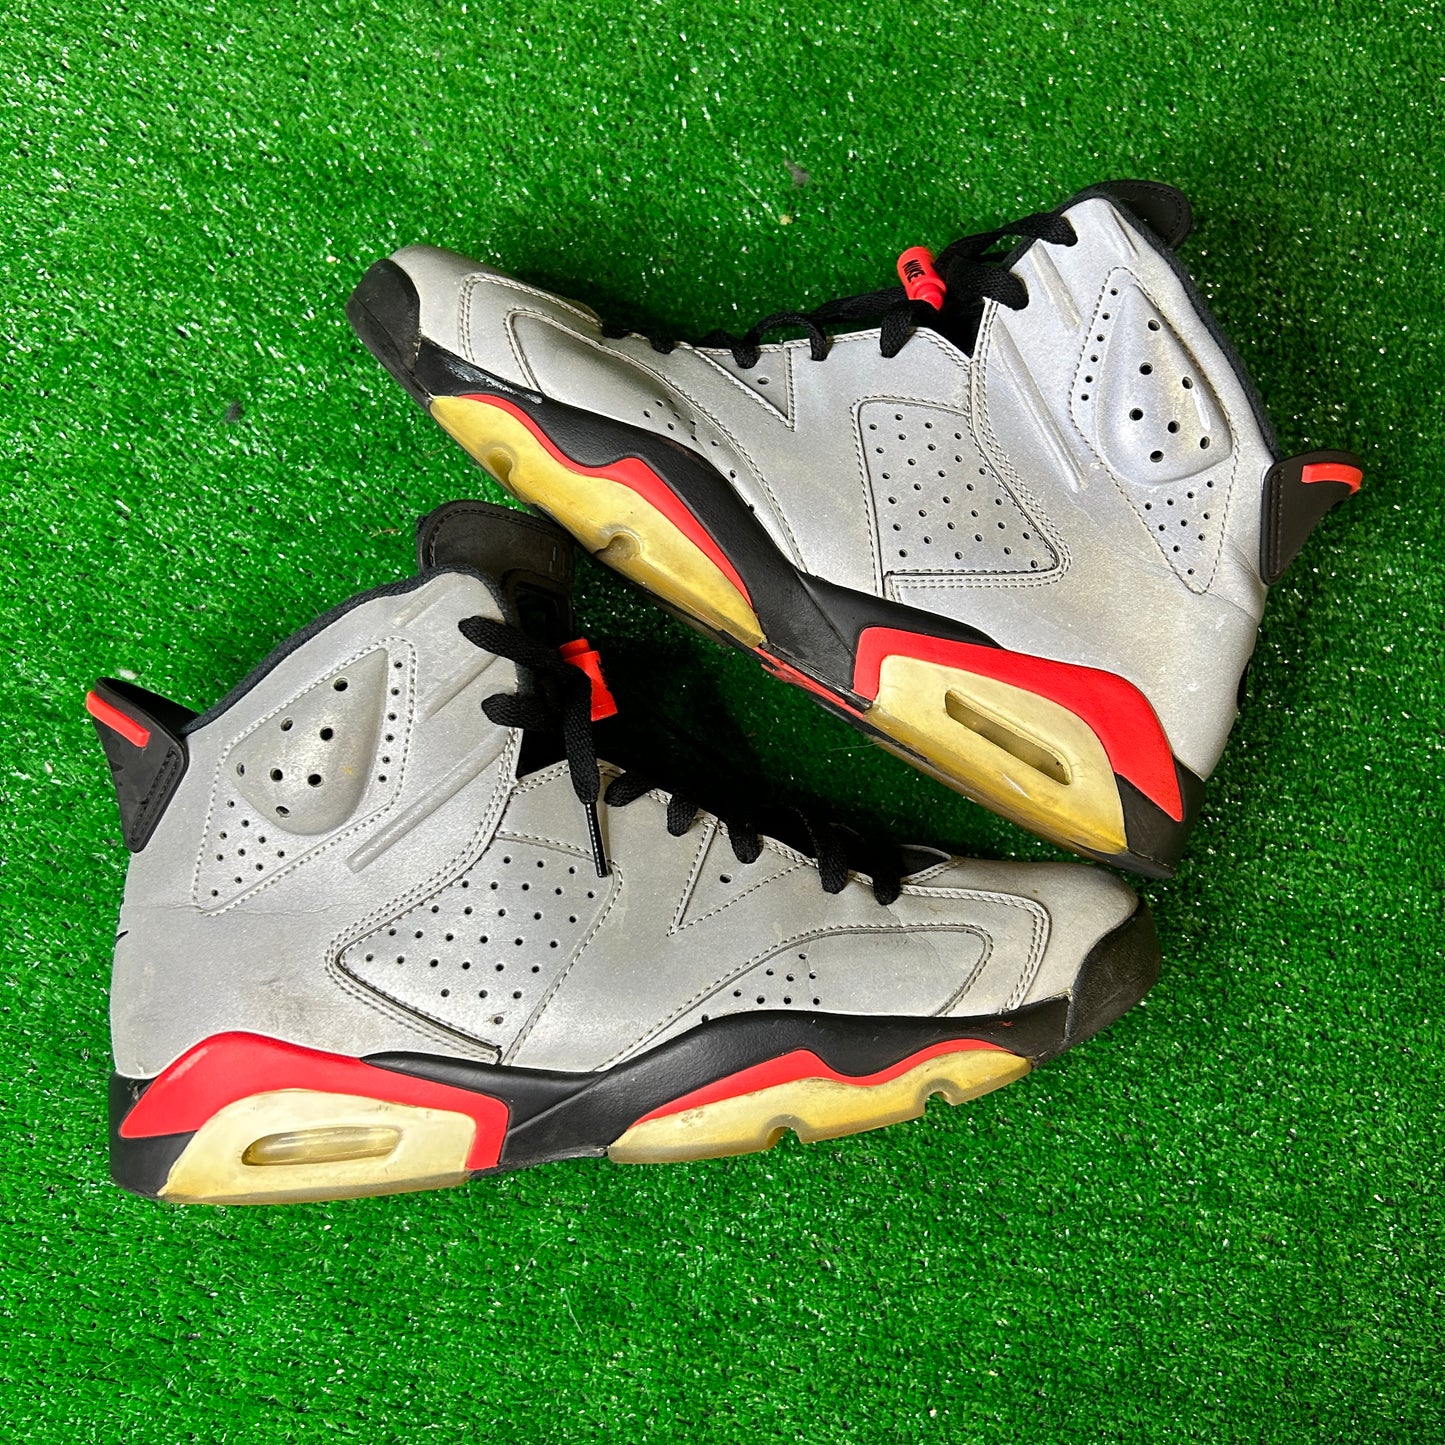 Jordan 6 Retro Reflections of a Champion (Pre-Owned)